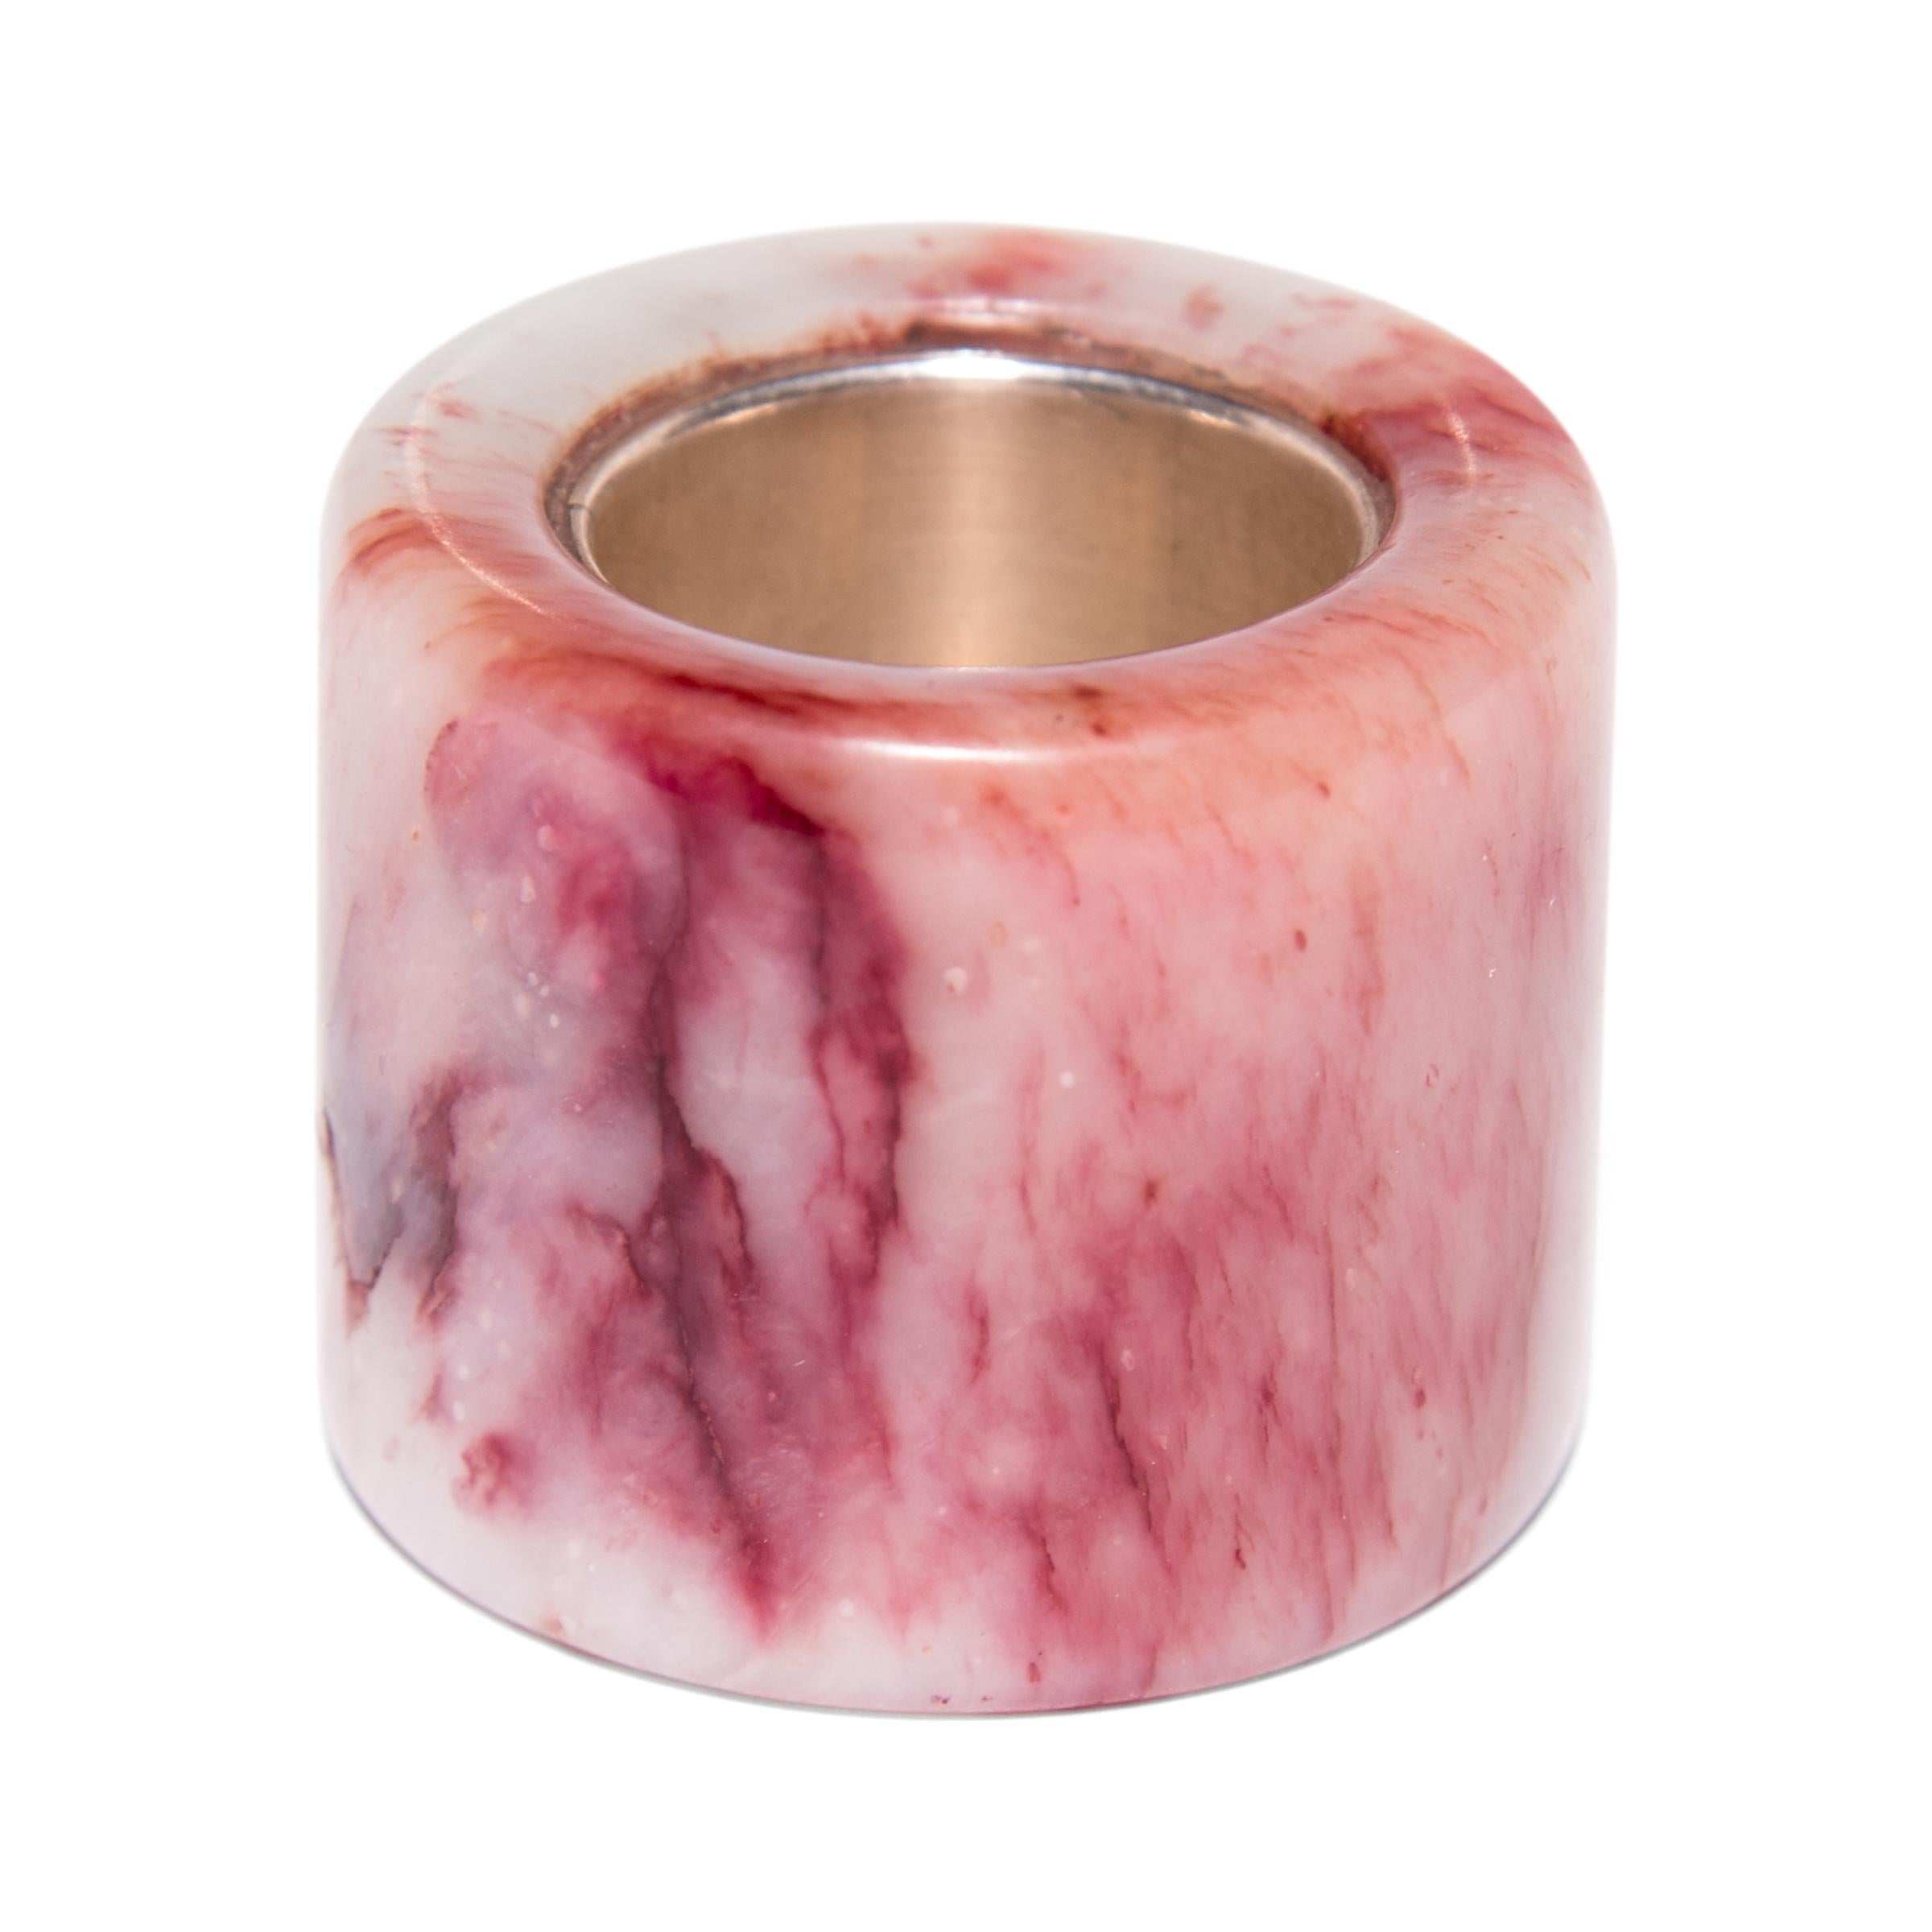 Hand carved of vibrant red jadeite, known as konpi, this 18th century archer's ring was likely once worn by a gentleman-scholar in northern China. Traditionally, Chinese archers wore these rings to protect their thumbs while drawing a bowstring.